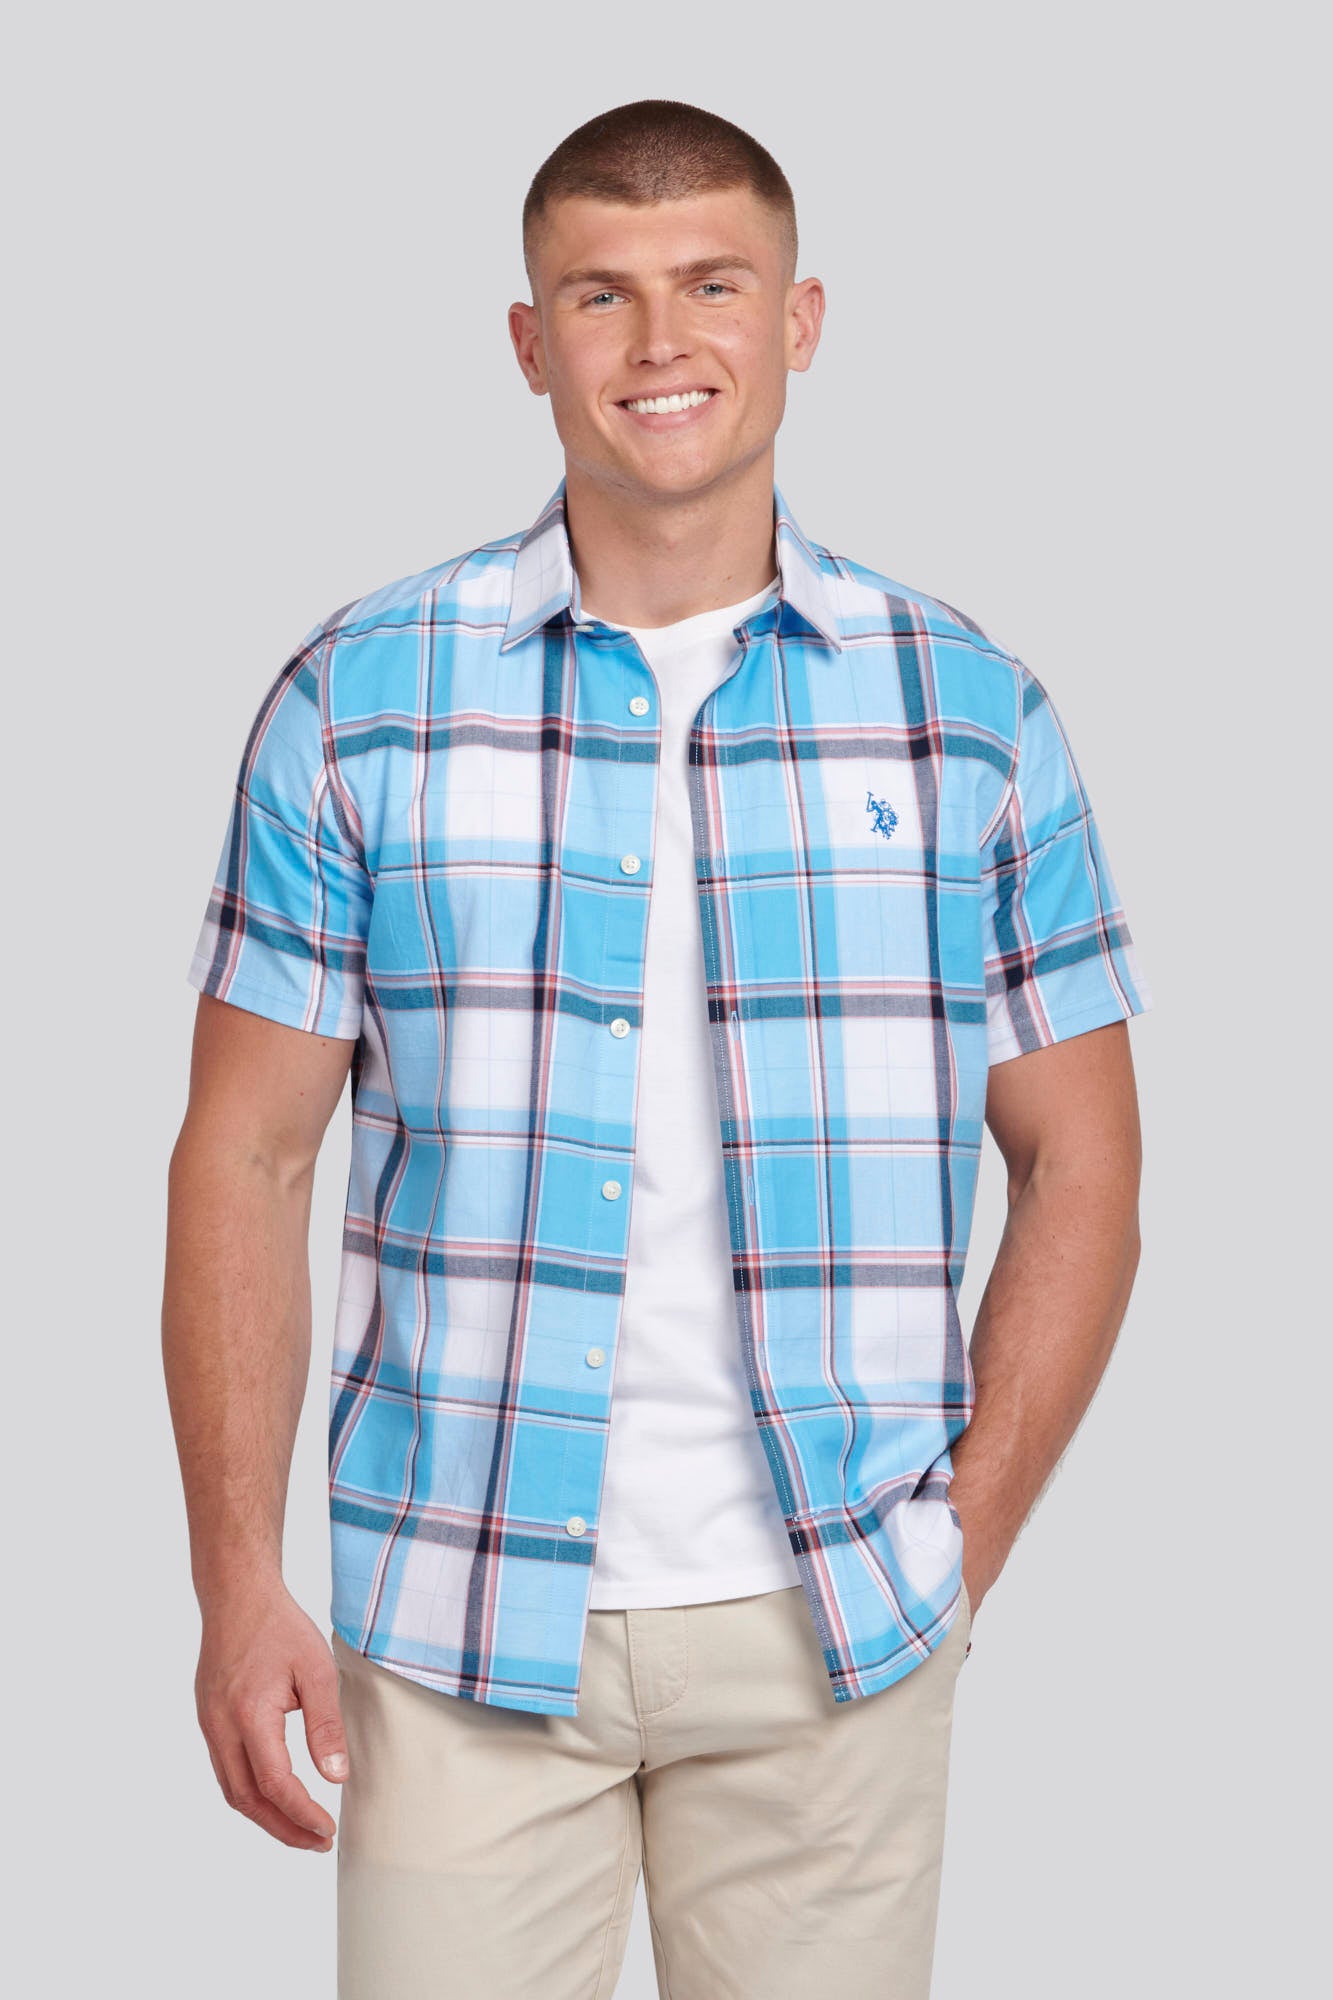 U.S. Polo Assn. Mens Short Sleeve Check Shirt in Ethereal Blue